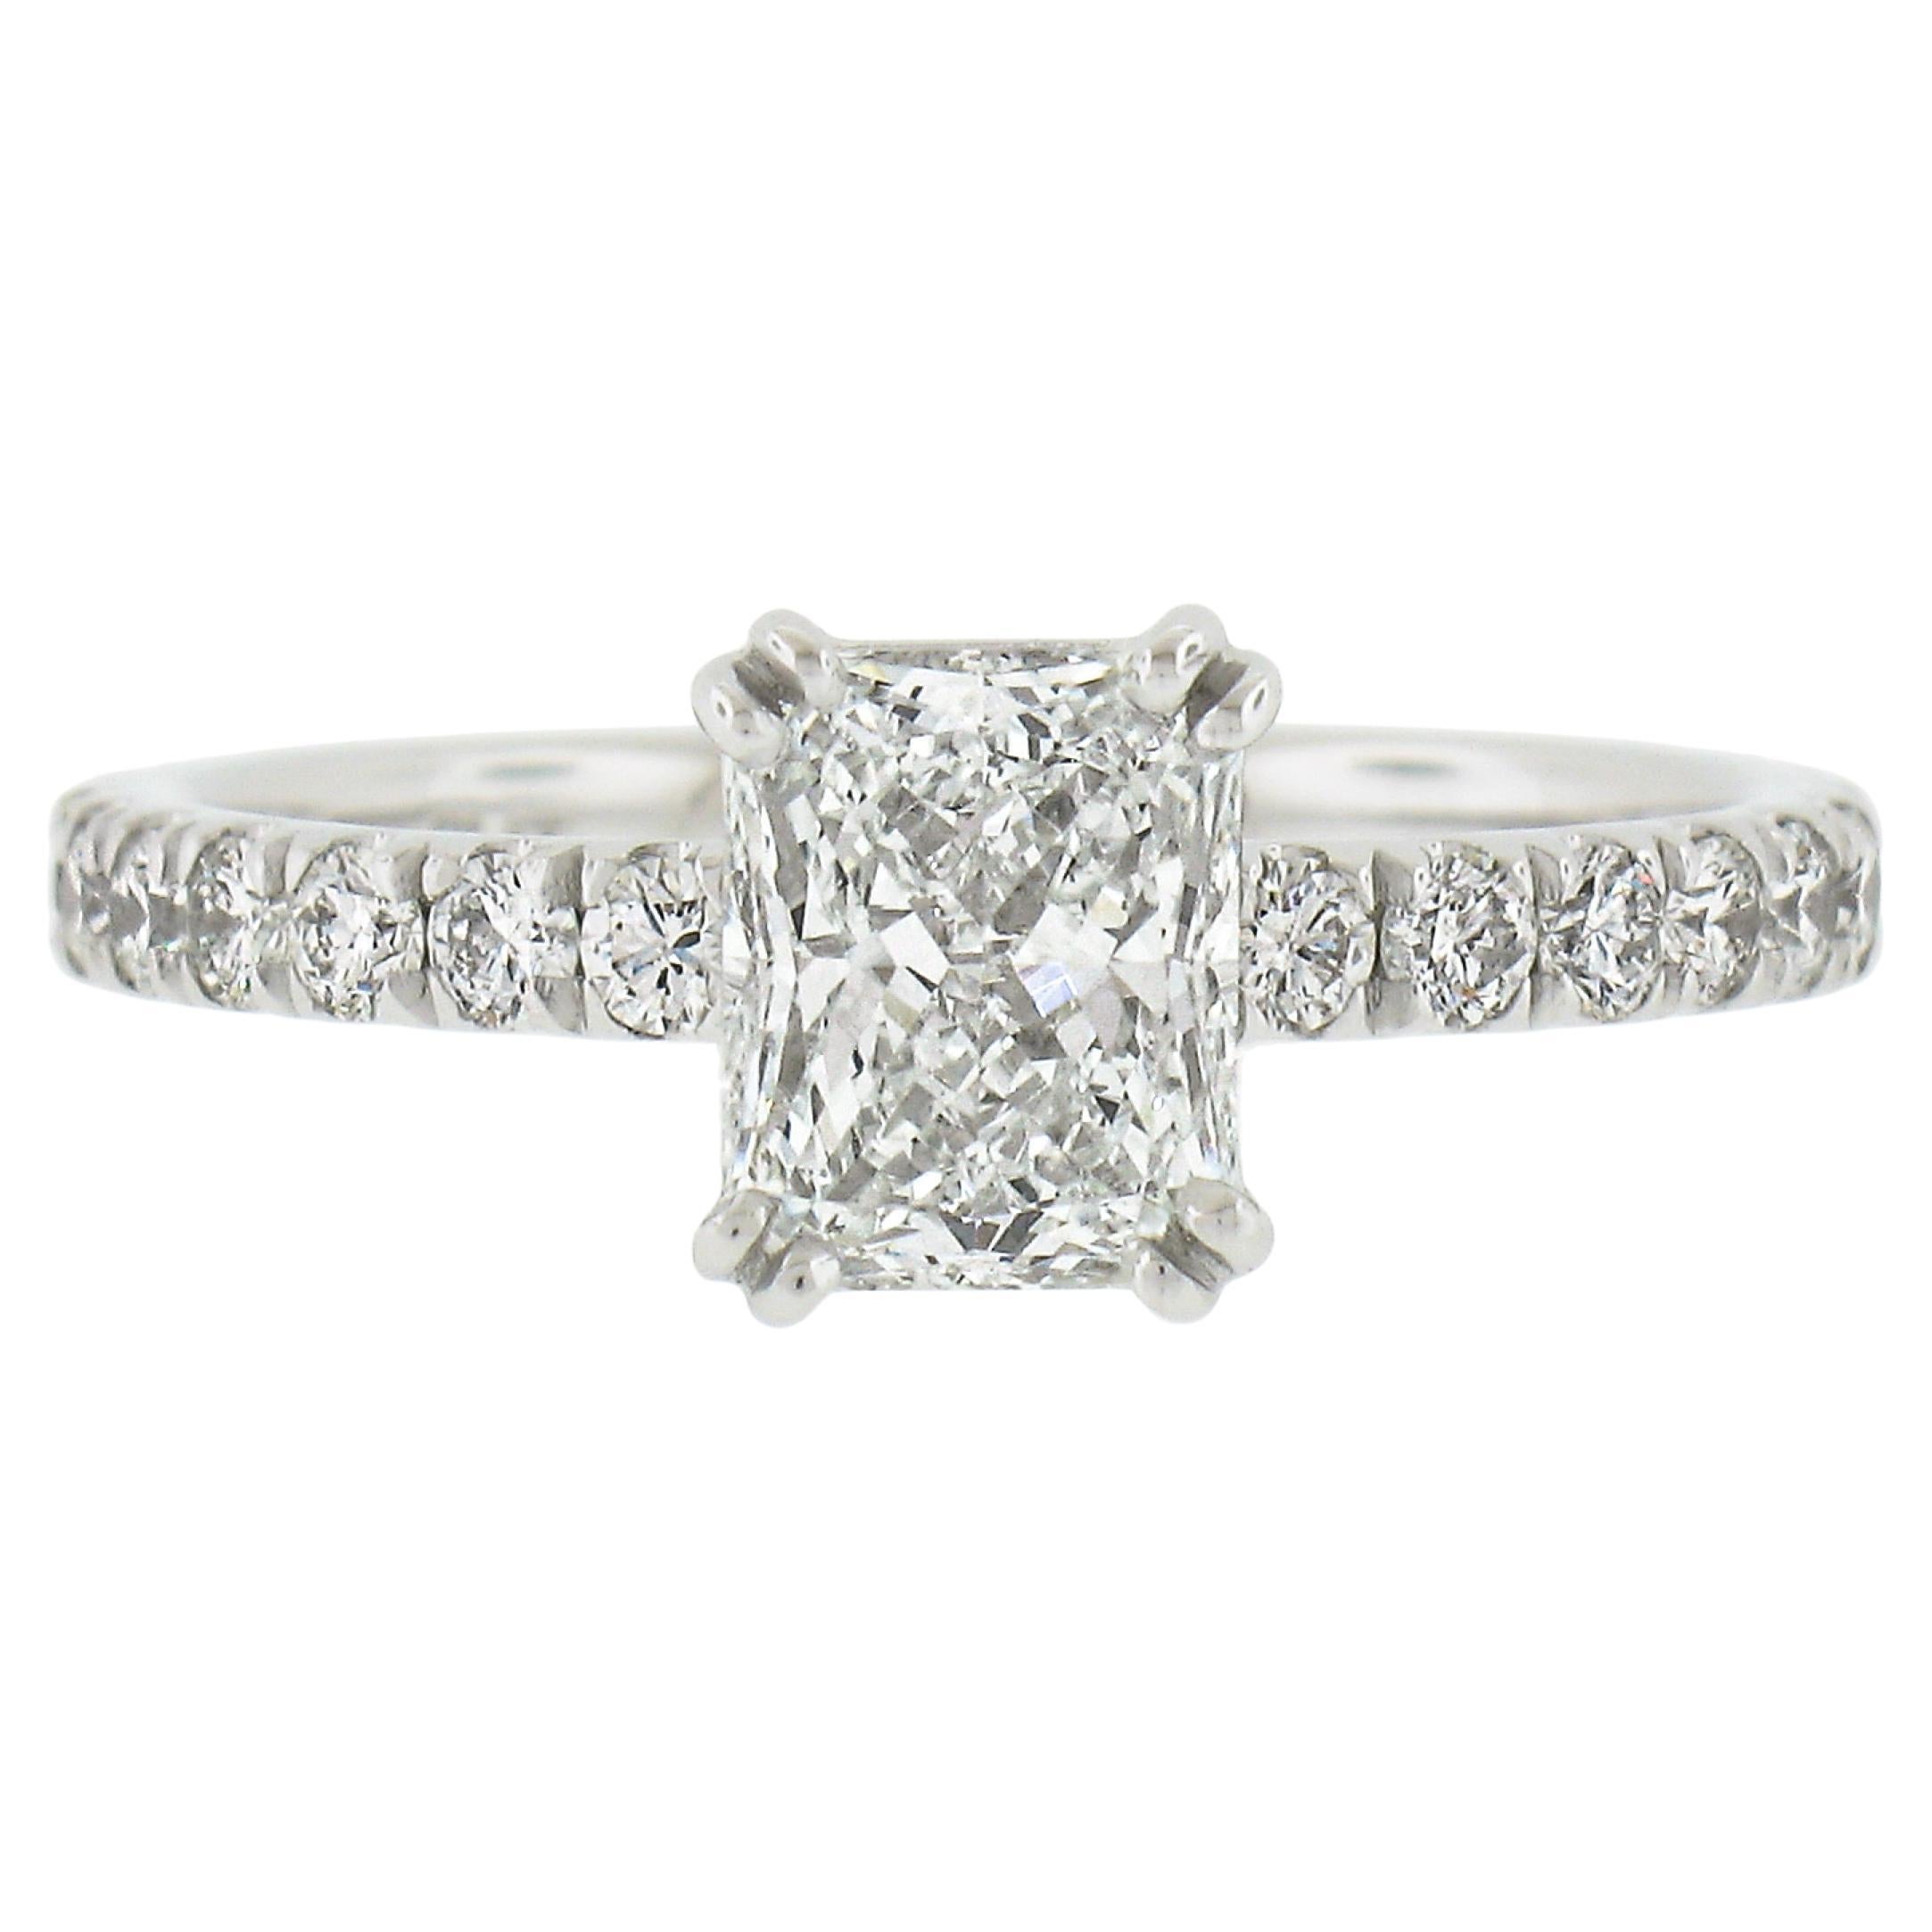 NEW Platinum GIA 1.54ctw Elongated Radiant Cut Diamond Solitaire Engagement Ring For Sale